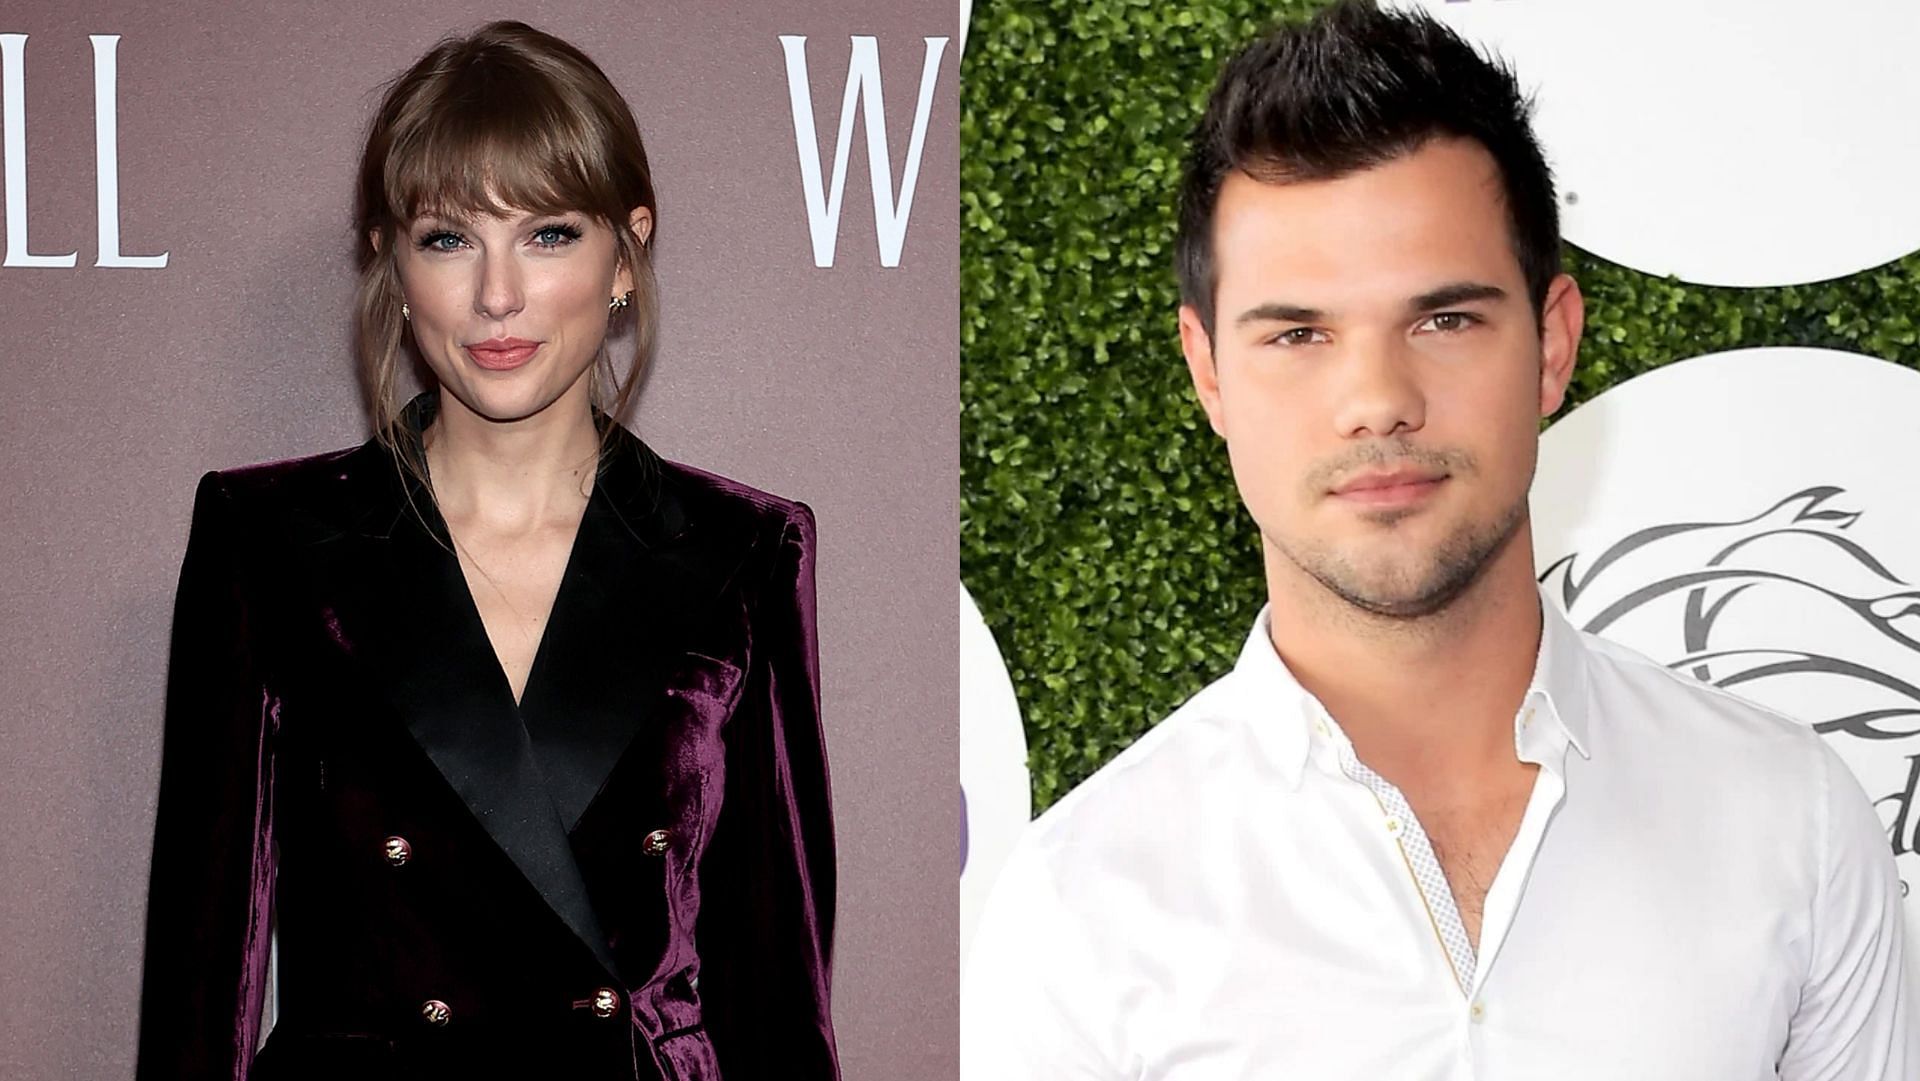 Taylor Swift and Taylor Lautner. (Image via Dimitrios Kambouris/Getty, Charley Gallay/Getty)